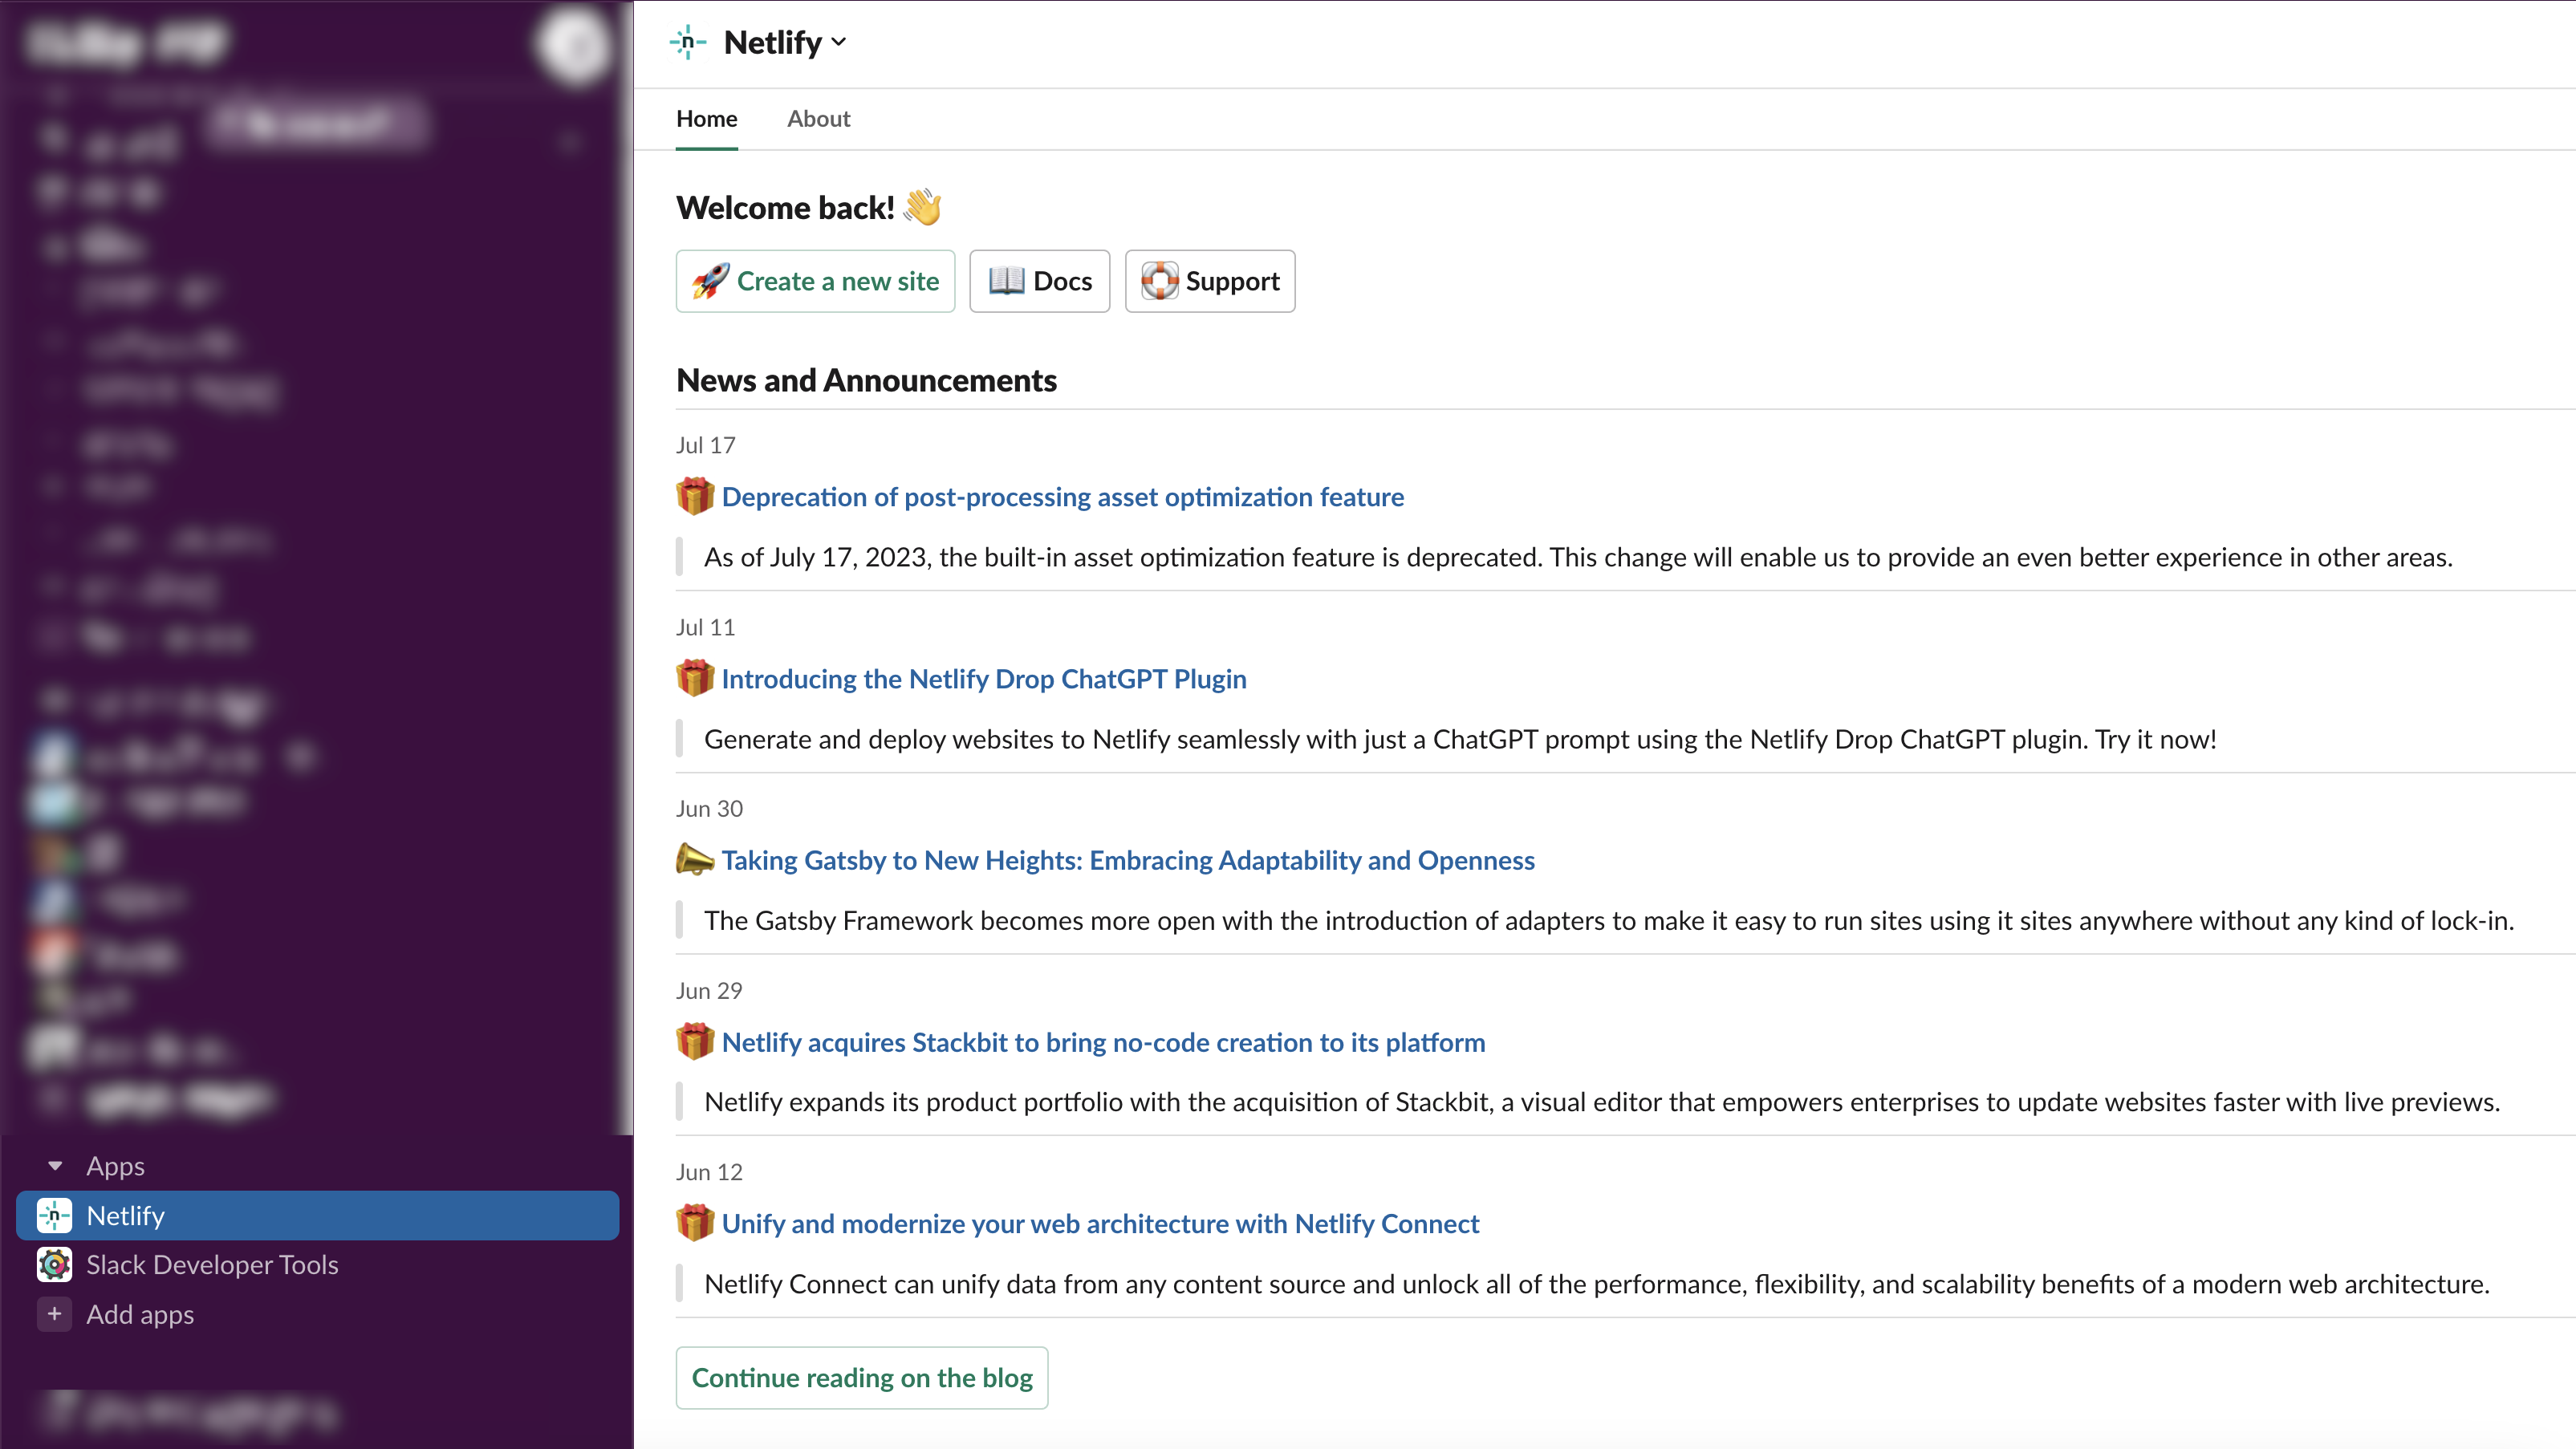 Slack app window showing the Netlify Slack app selected with a list of Netlify product updates